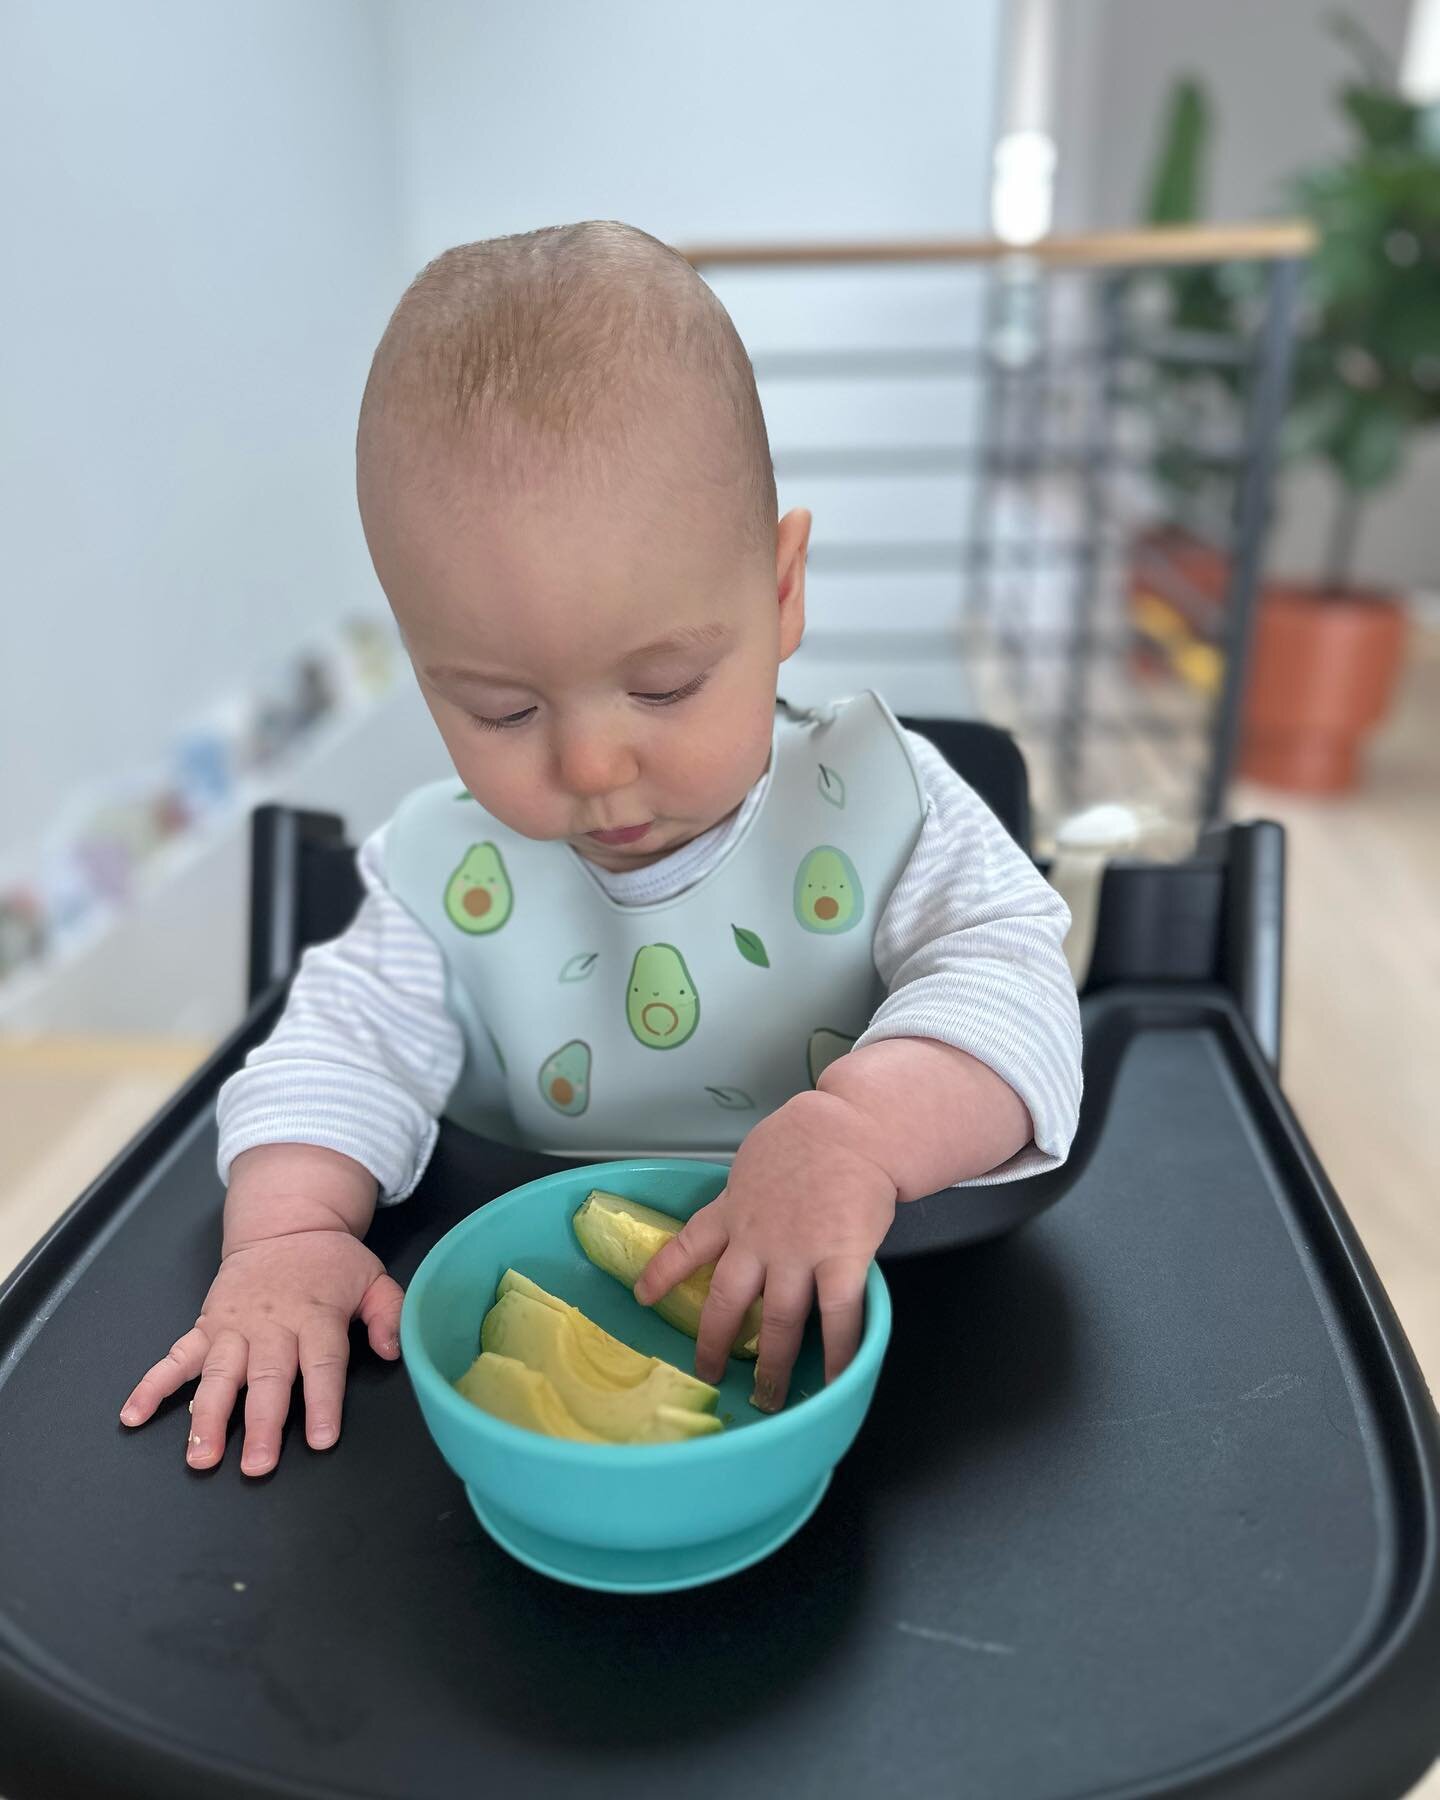 Today is the day! Levi is 6 months old and we are beginning our baby led weaning journey. In this approach Levi takes the led in feeding himself. I have exclusively breastfed Levi for 6 months, so this is a huge, emotional, and very exciting step for